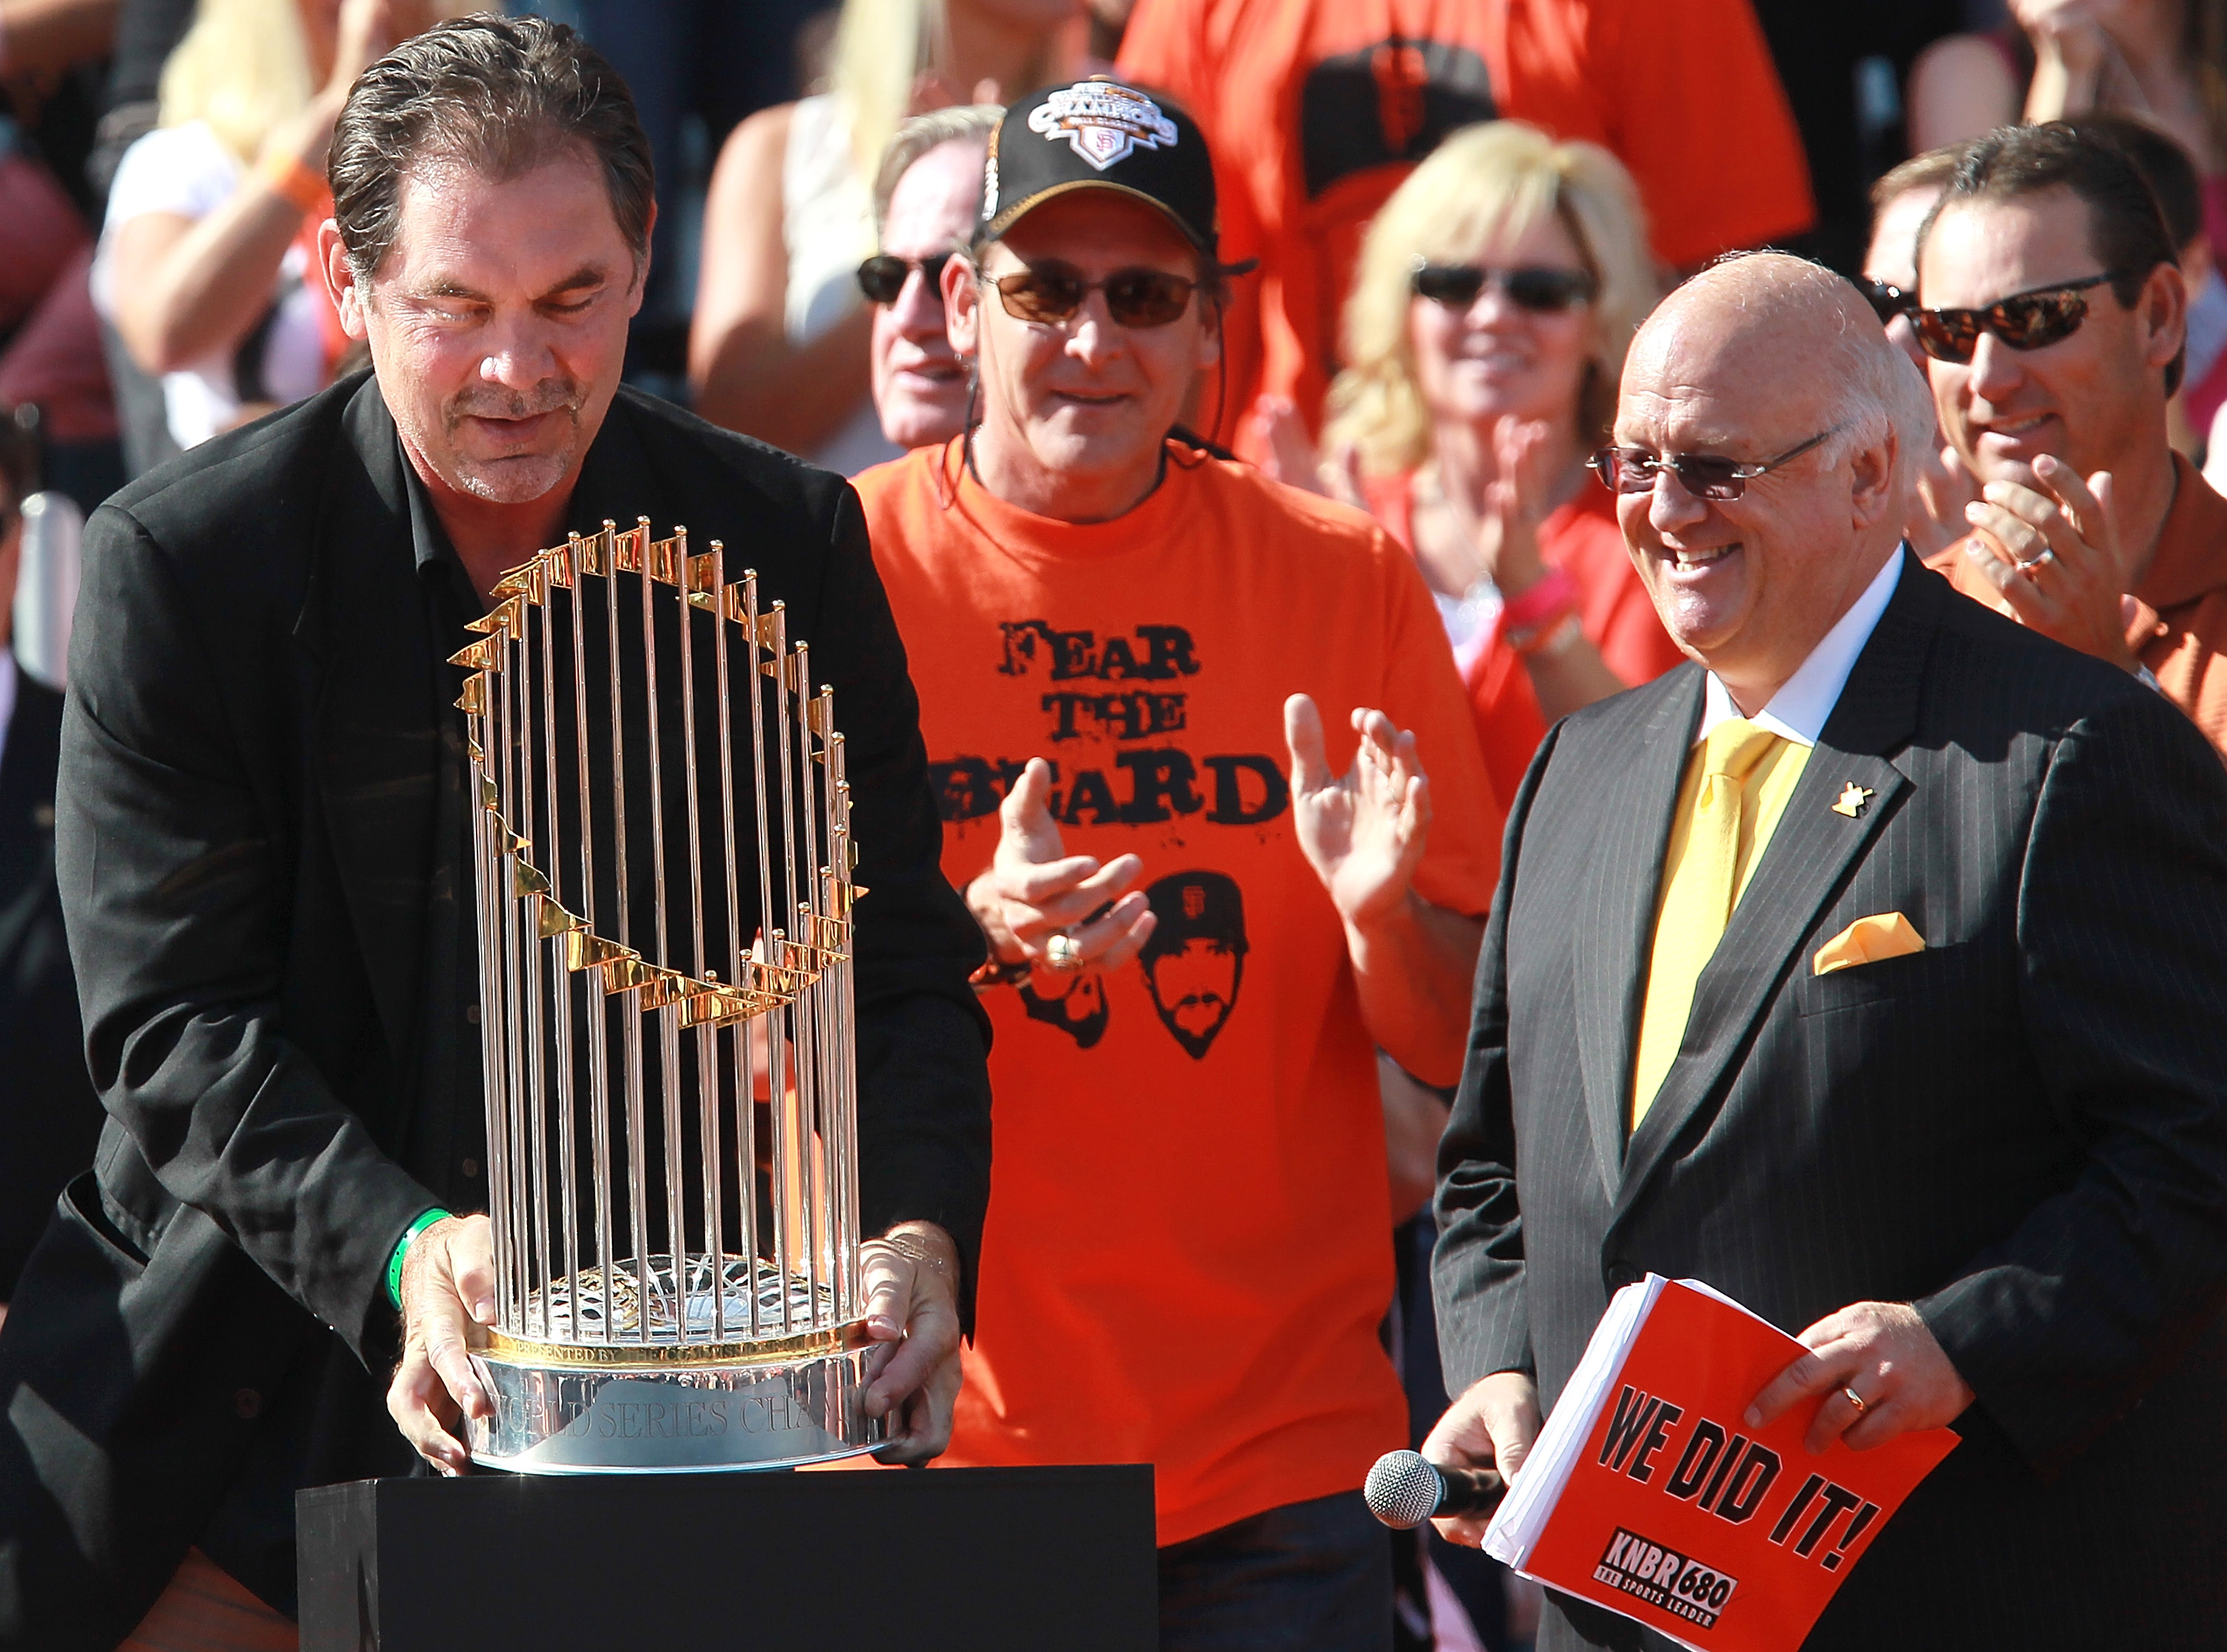 SAN FRANCISCO - NOVEMBER 03:  San Francisco Giants manager Bruce Bochy (L) carries the World Series trophy at the conclusion of the Giants' victory parade on November 3, 2010 in San Francisco, California. Thousands of Giants fans lined the streets of San 